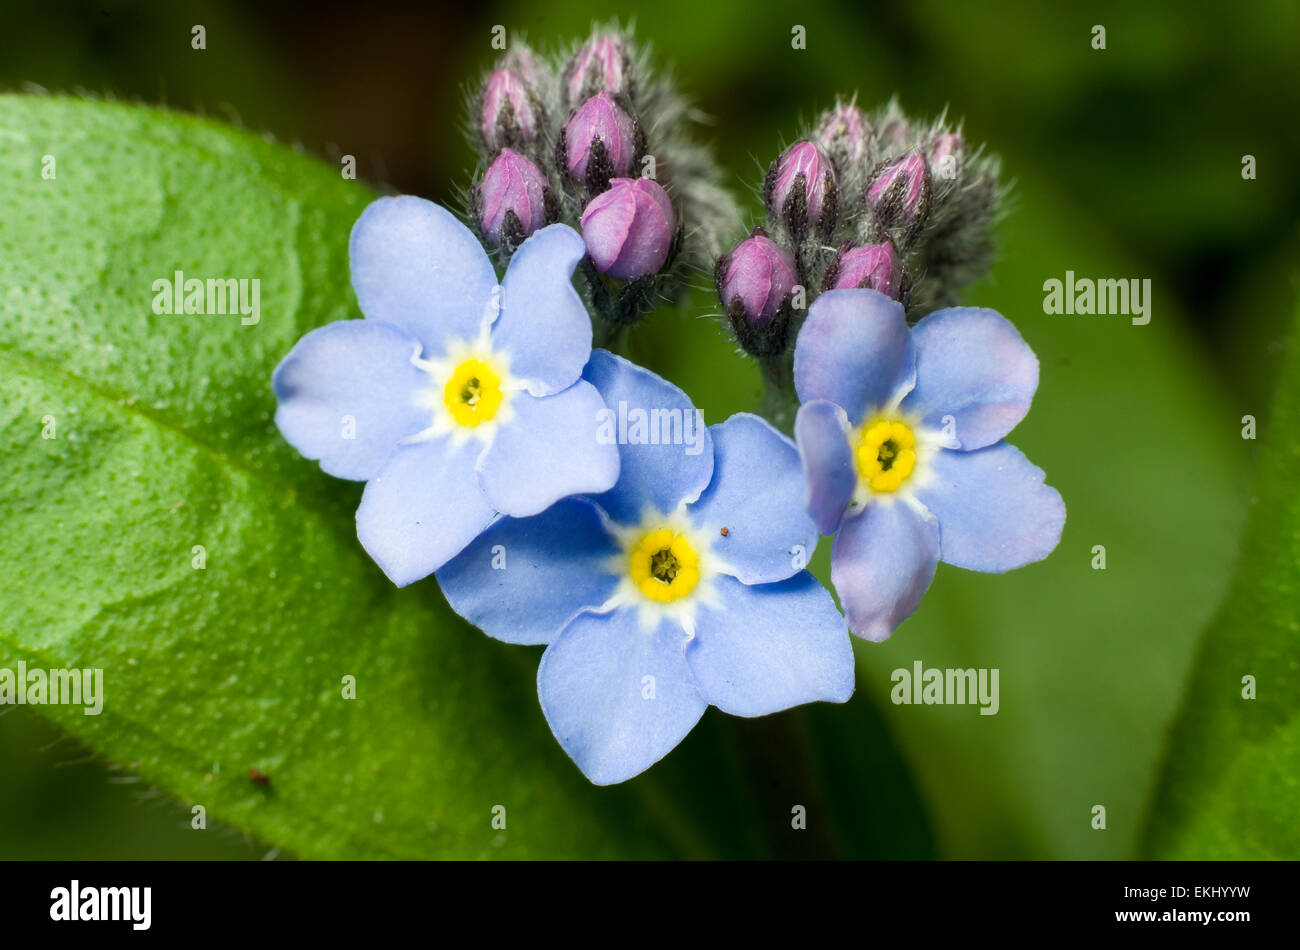 Forget-me-not flowers close up Stock Photo